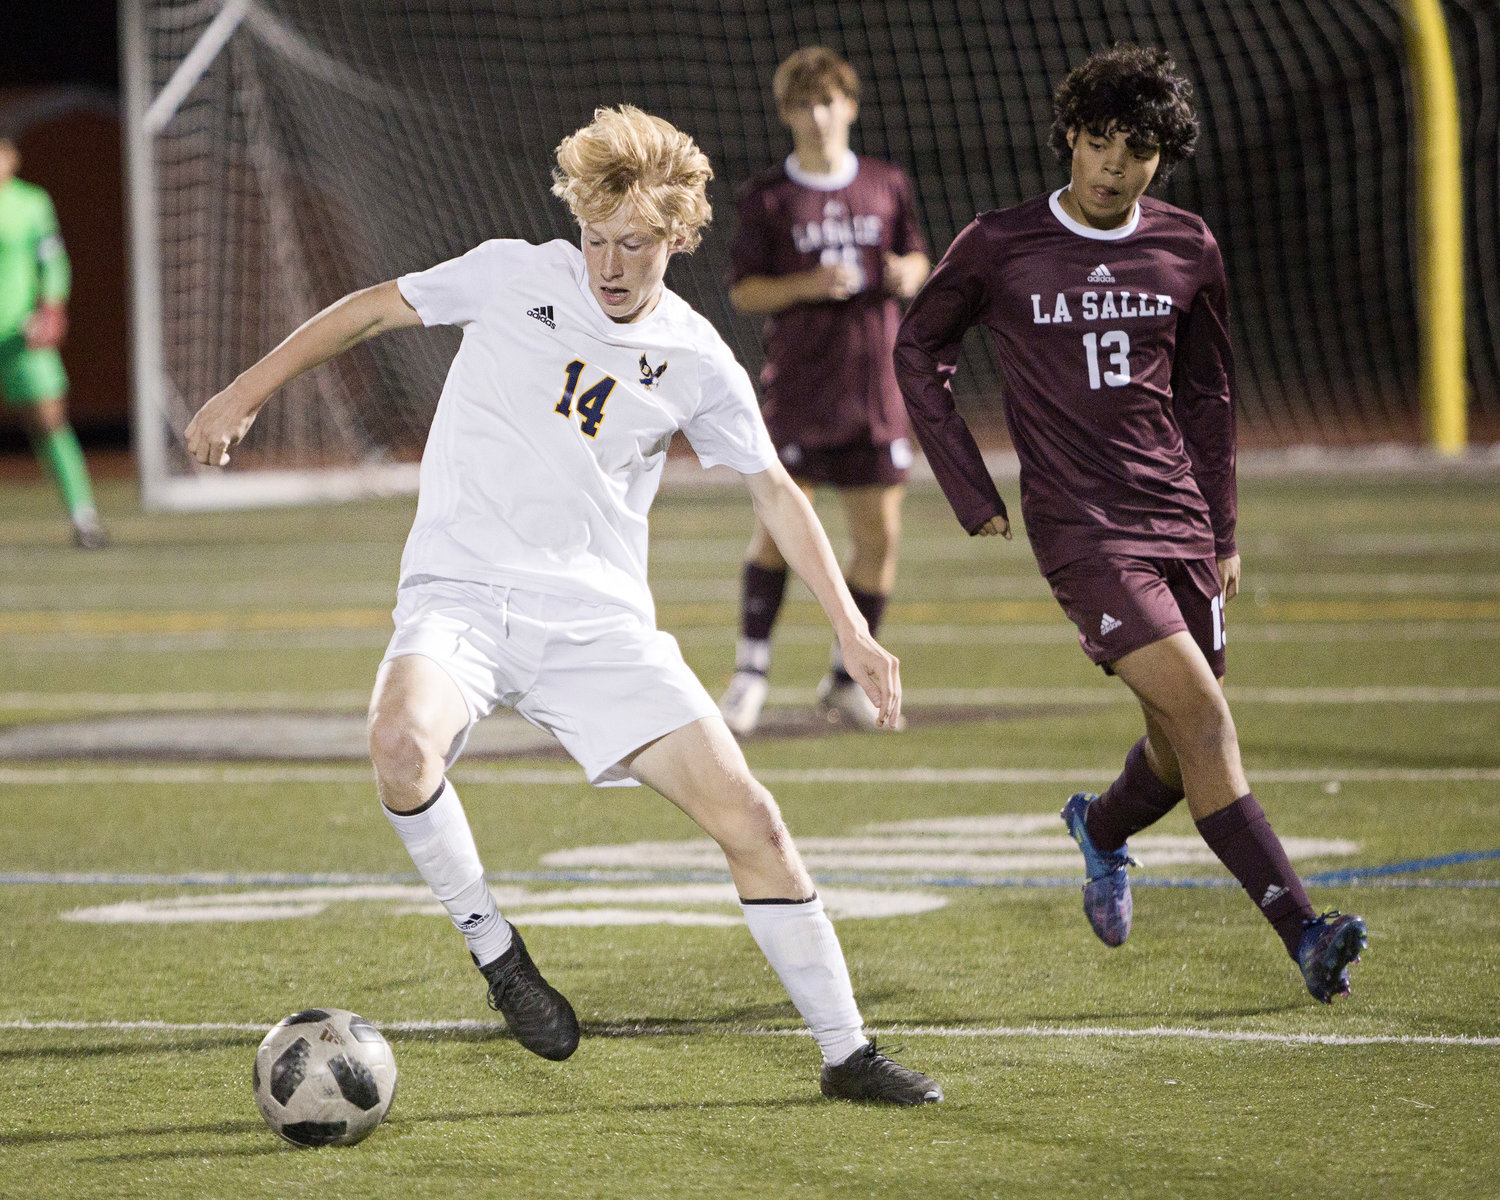 Leo Caldarella turns the ball toward the net while competing against LaSalle in the Division I semifinals, Wednesday.